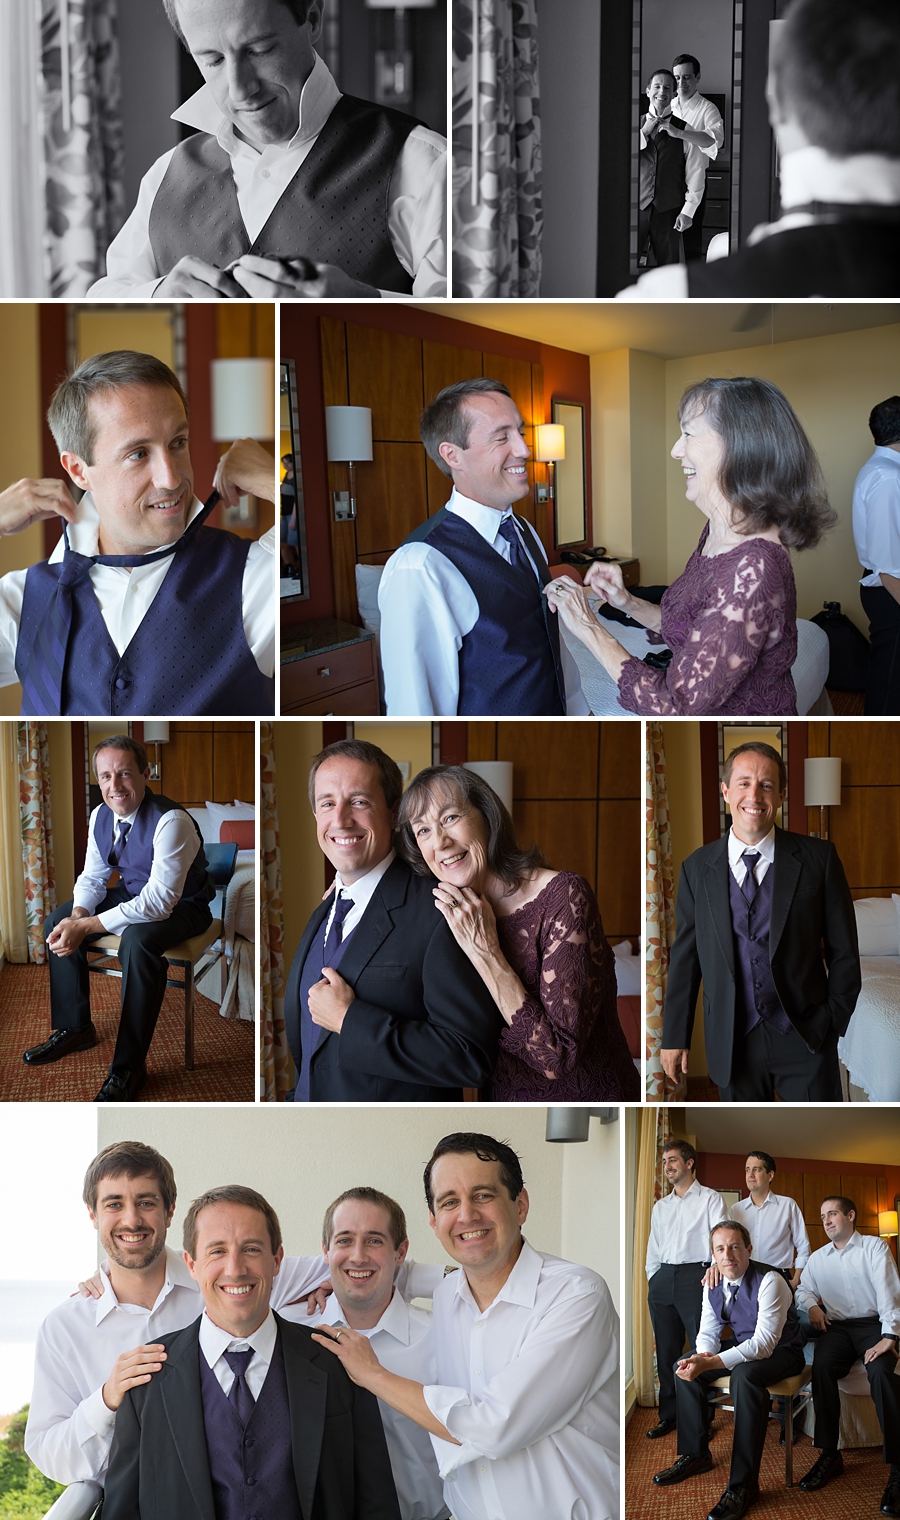 Images of the groom getting ready